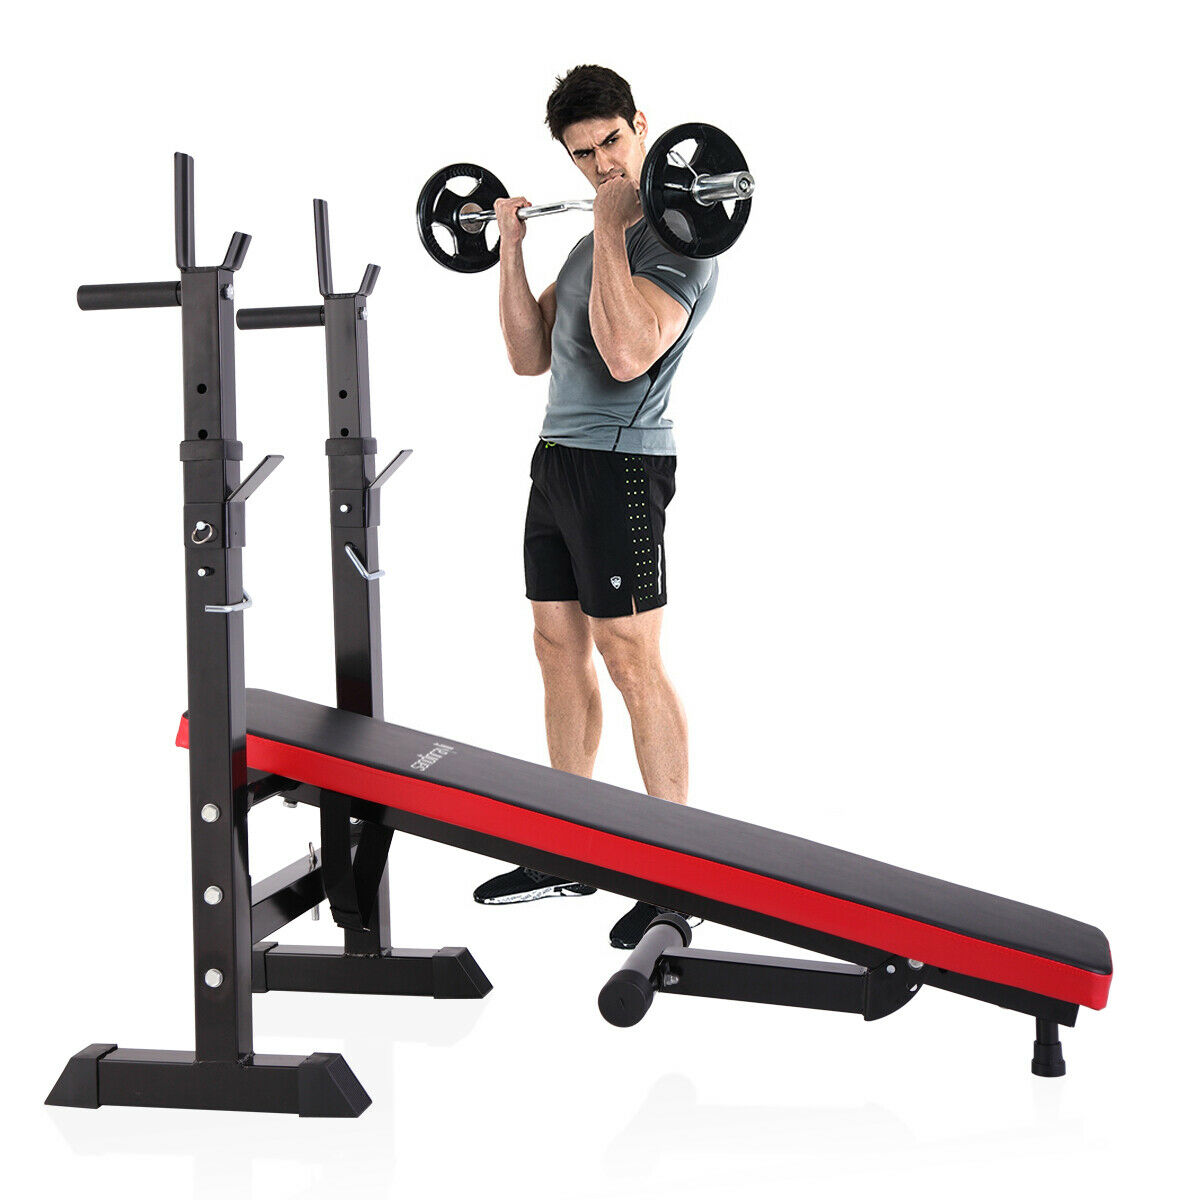 Folding Weight Bench With Rack Adjustable Lifting Strength Gym Workout Home Gym